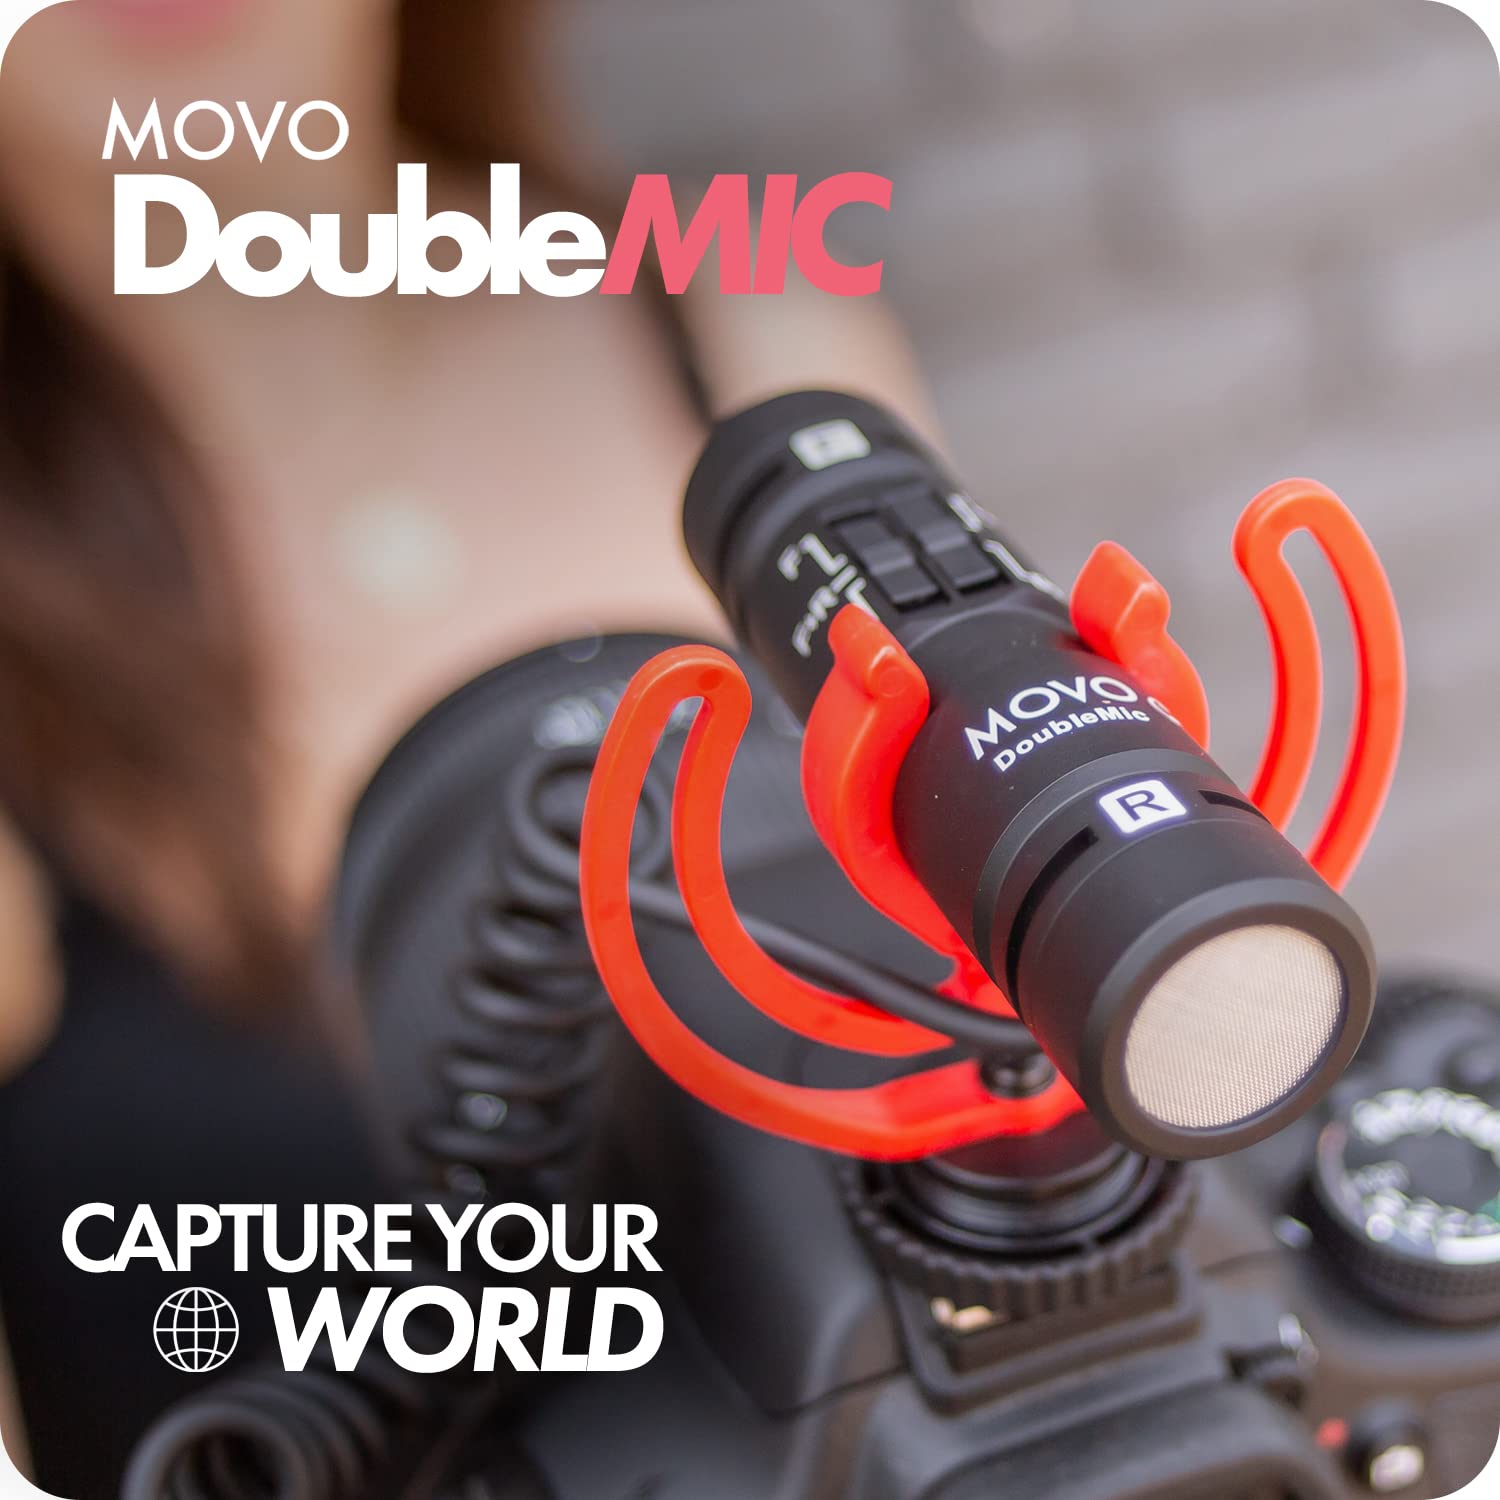 Movo DoubleMic V2 Two-Sided Shotgun Mic for Camera Vlogging - Dual Capsule External Microphone for iPhone, Android, Smartphones and DSLR Camcorders - Improved Wind Protection - Latest Version  - Like New